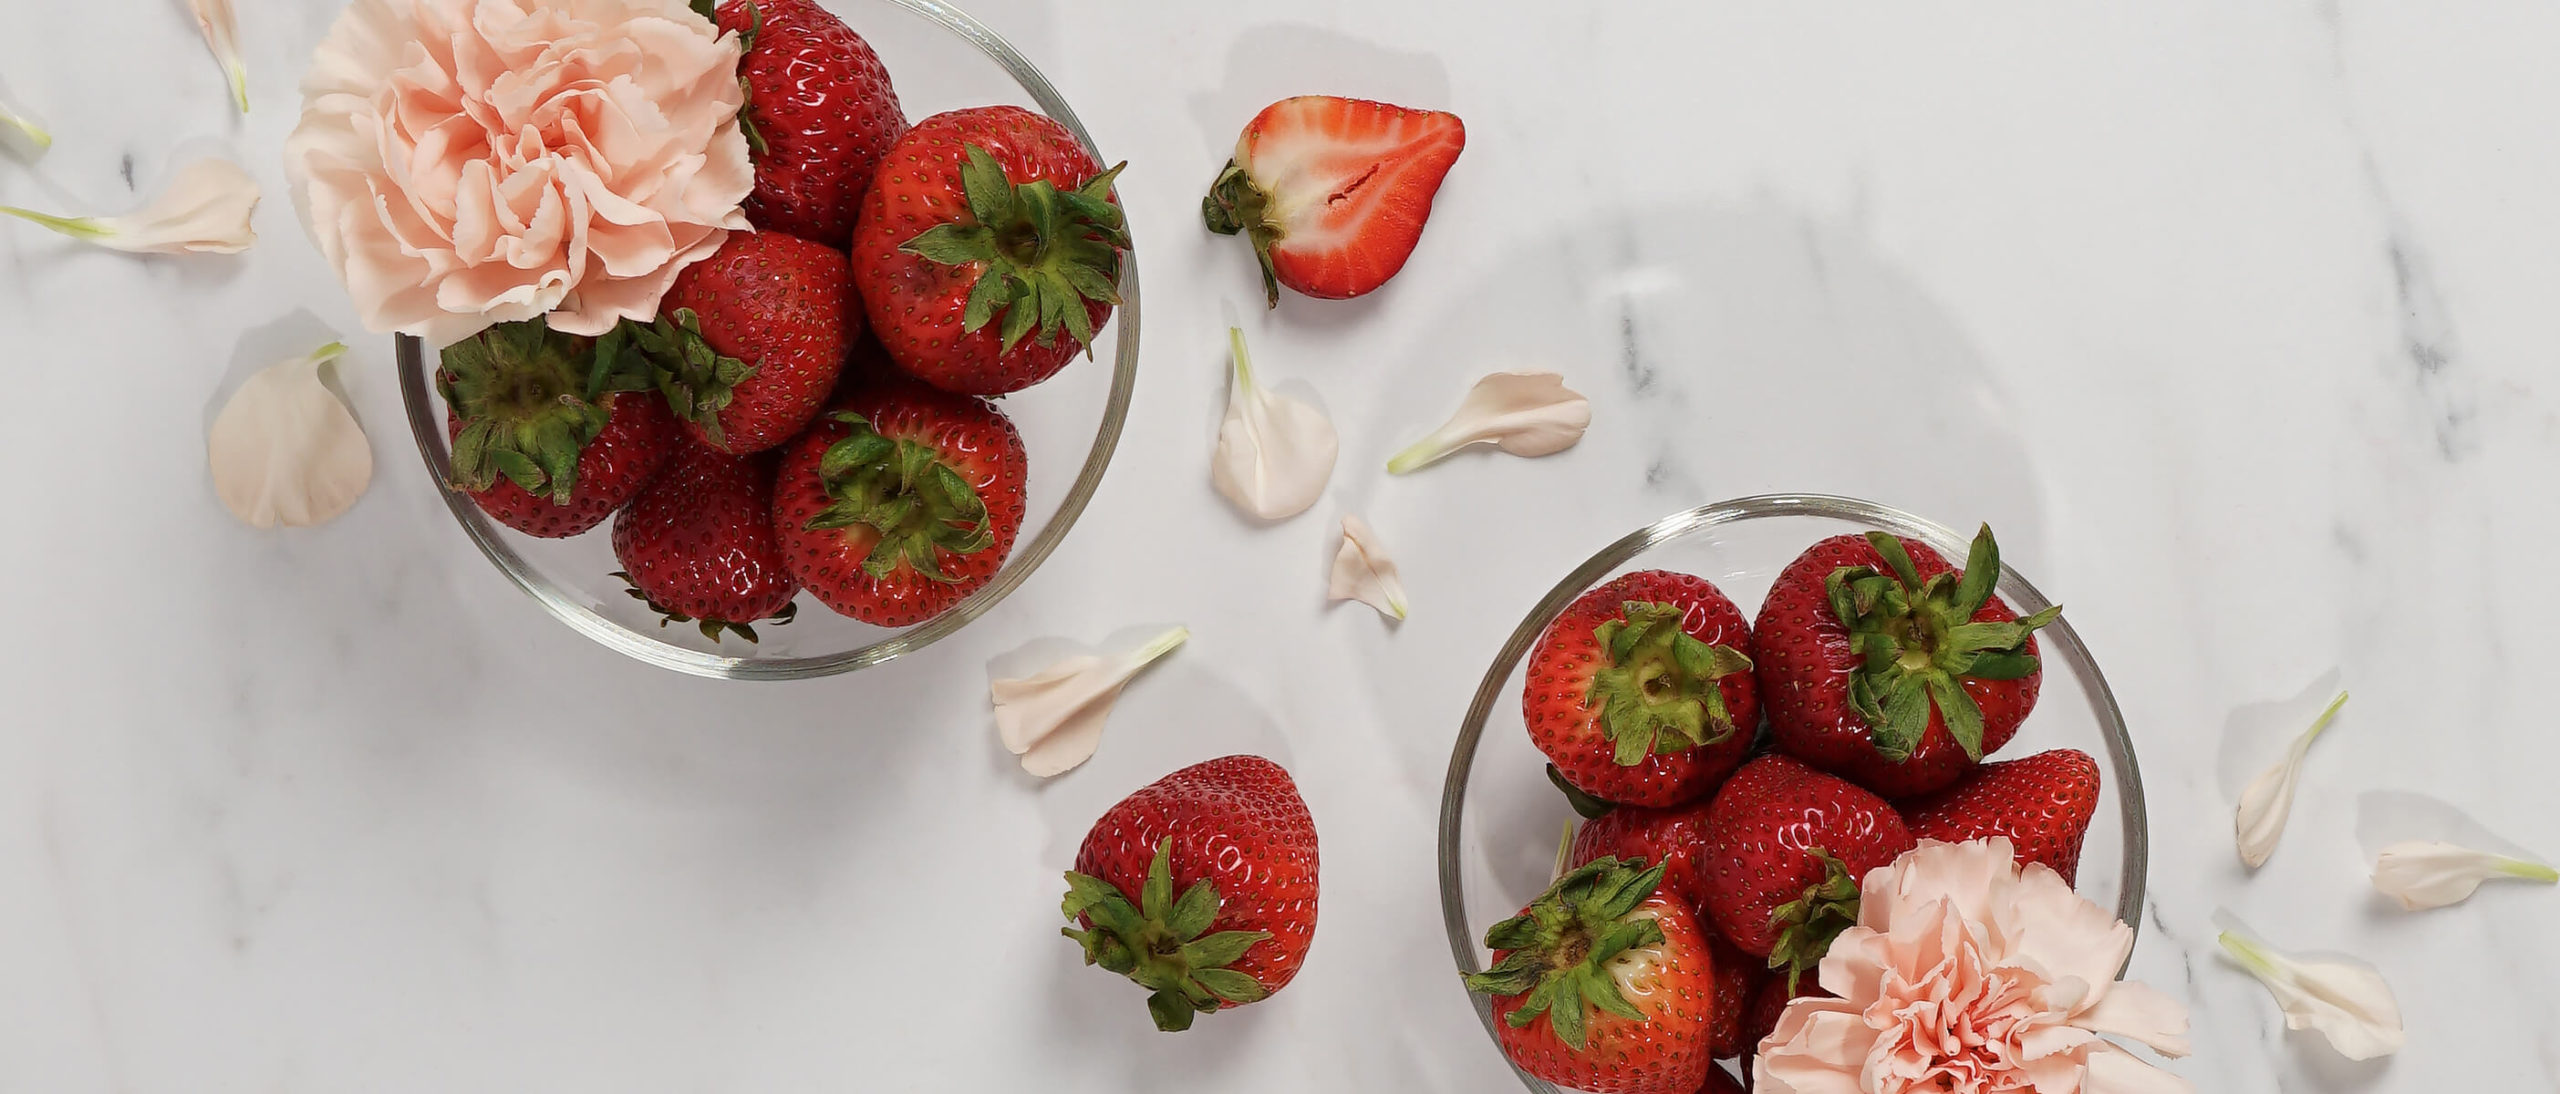 Strawberry Recipes You’ll Savor All Summer Long